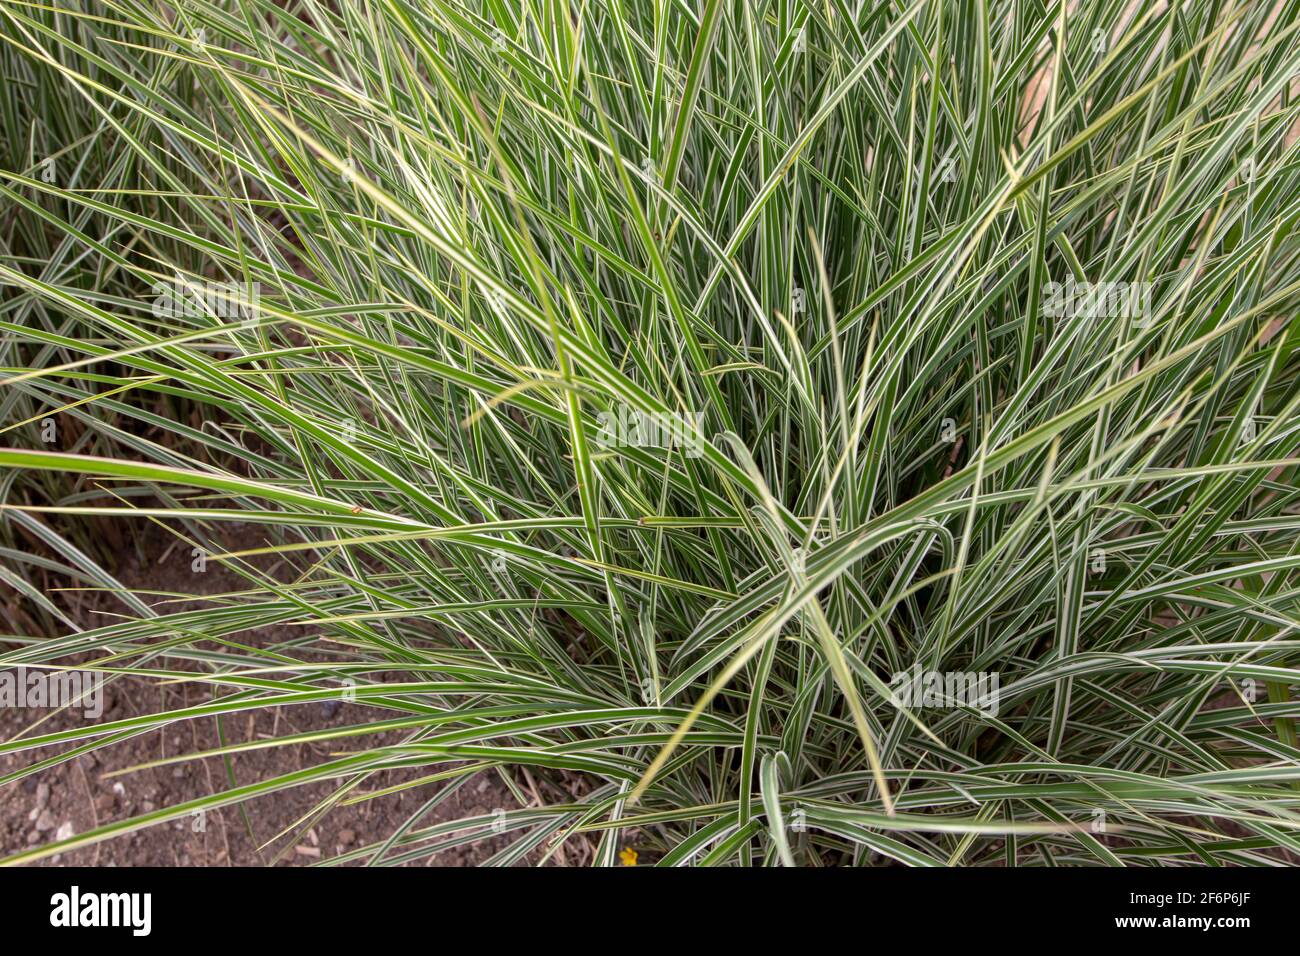 Miscanthus sinensis variegatus or variegated silver grass plant Stock Photo